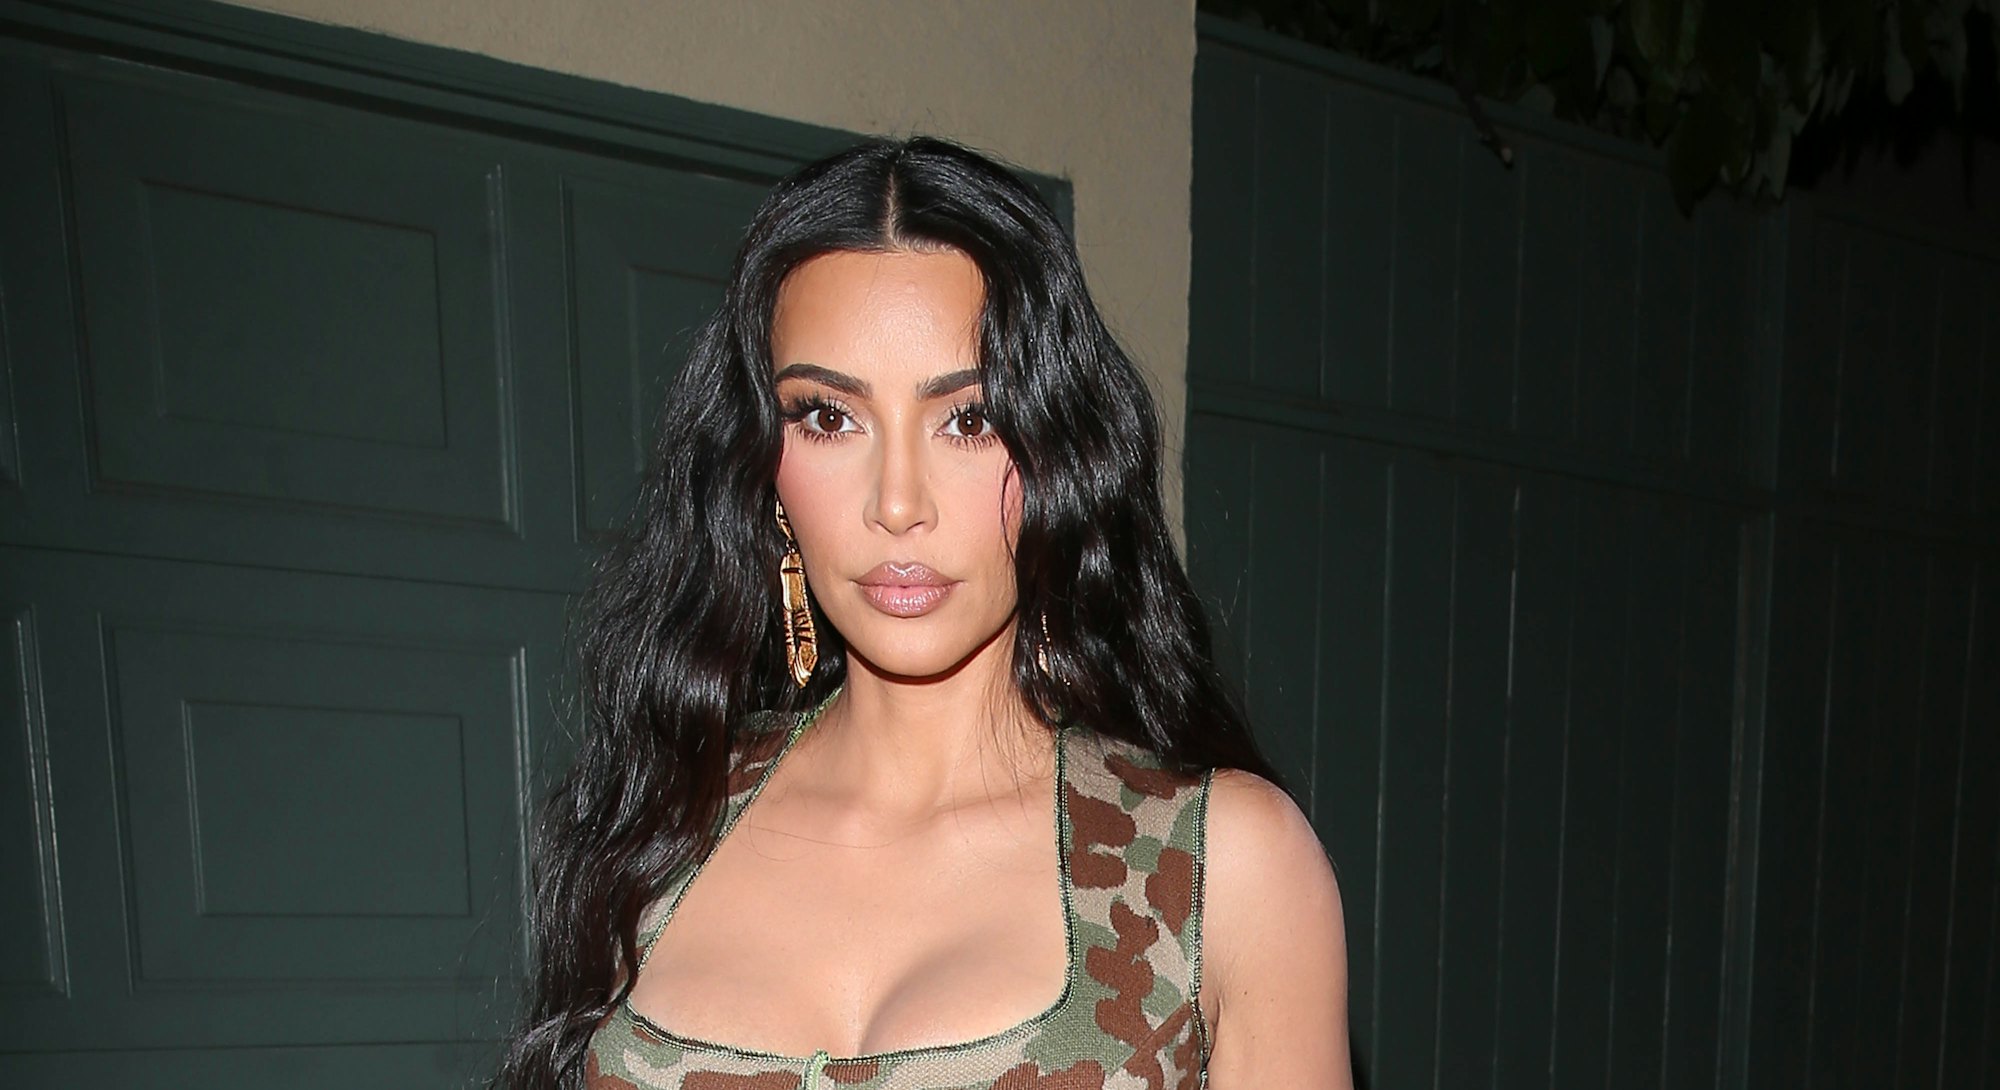 LOS ANGELES CA - MAY 22: Kim Kardashian steps out to dinner at Craigs on May 22, 2021 in Los Angeles...